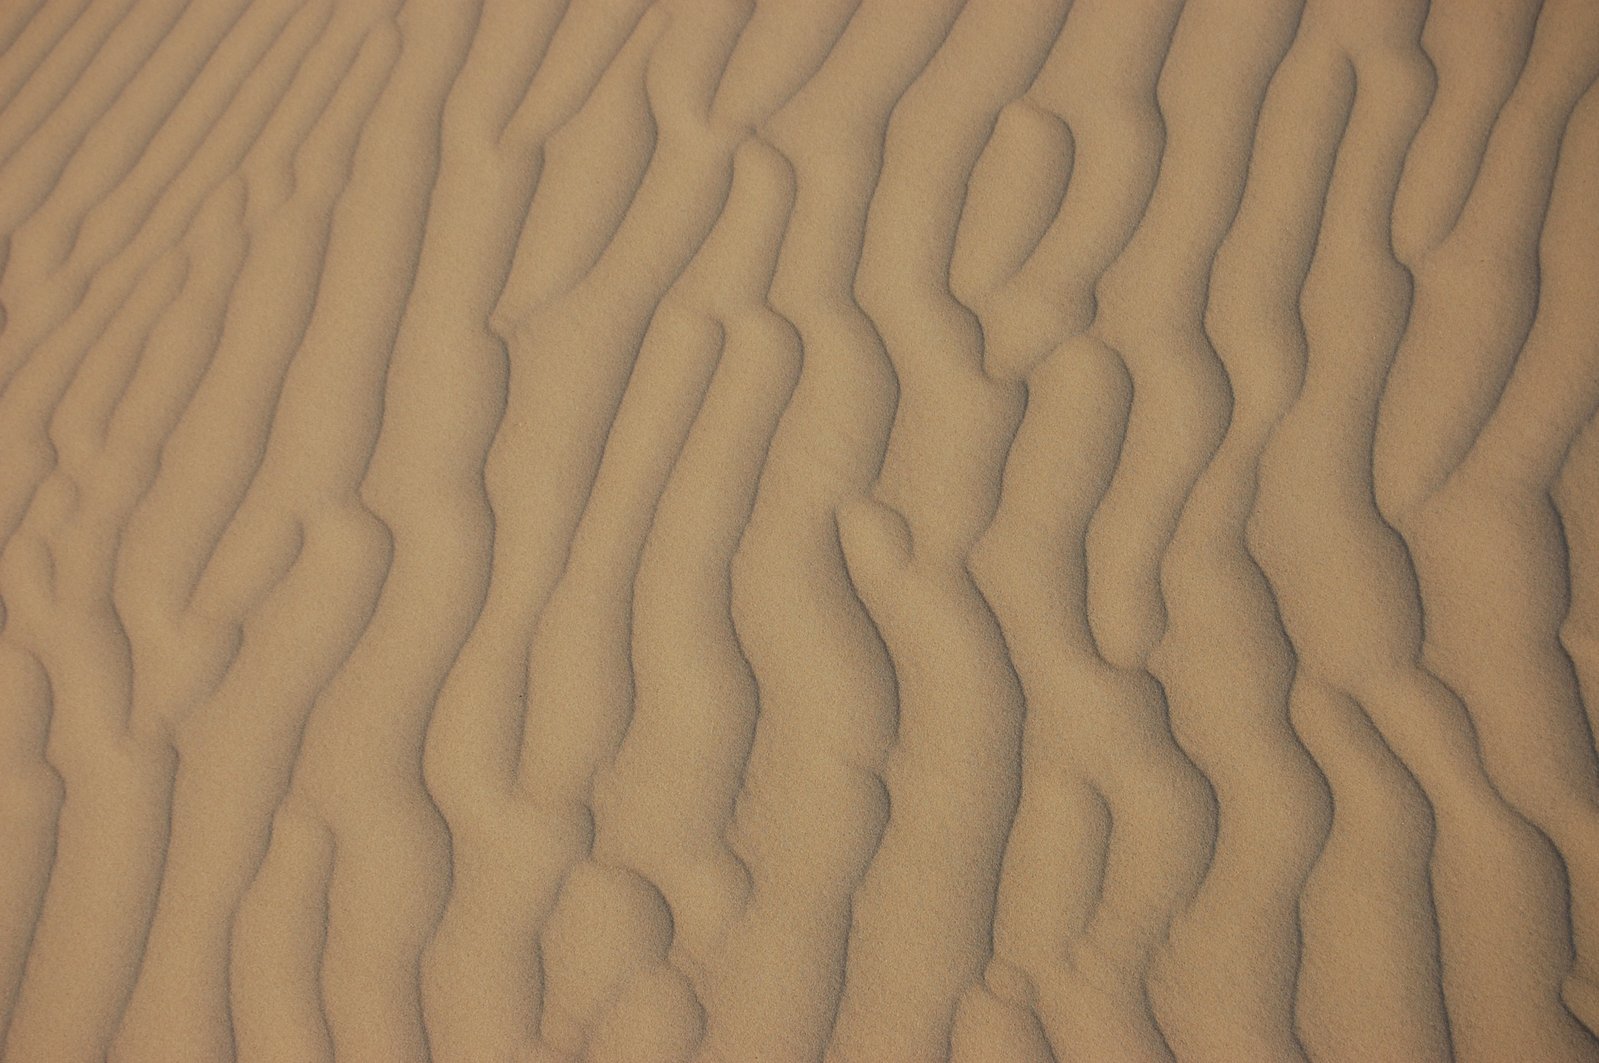 a wave pattern in the sand in the desert